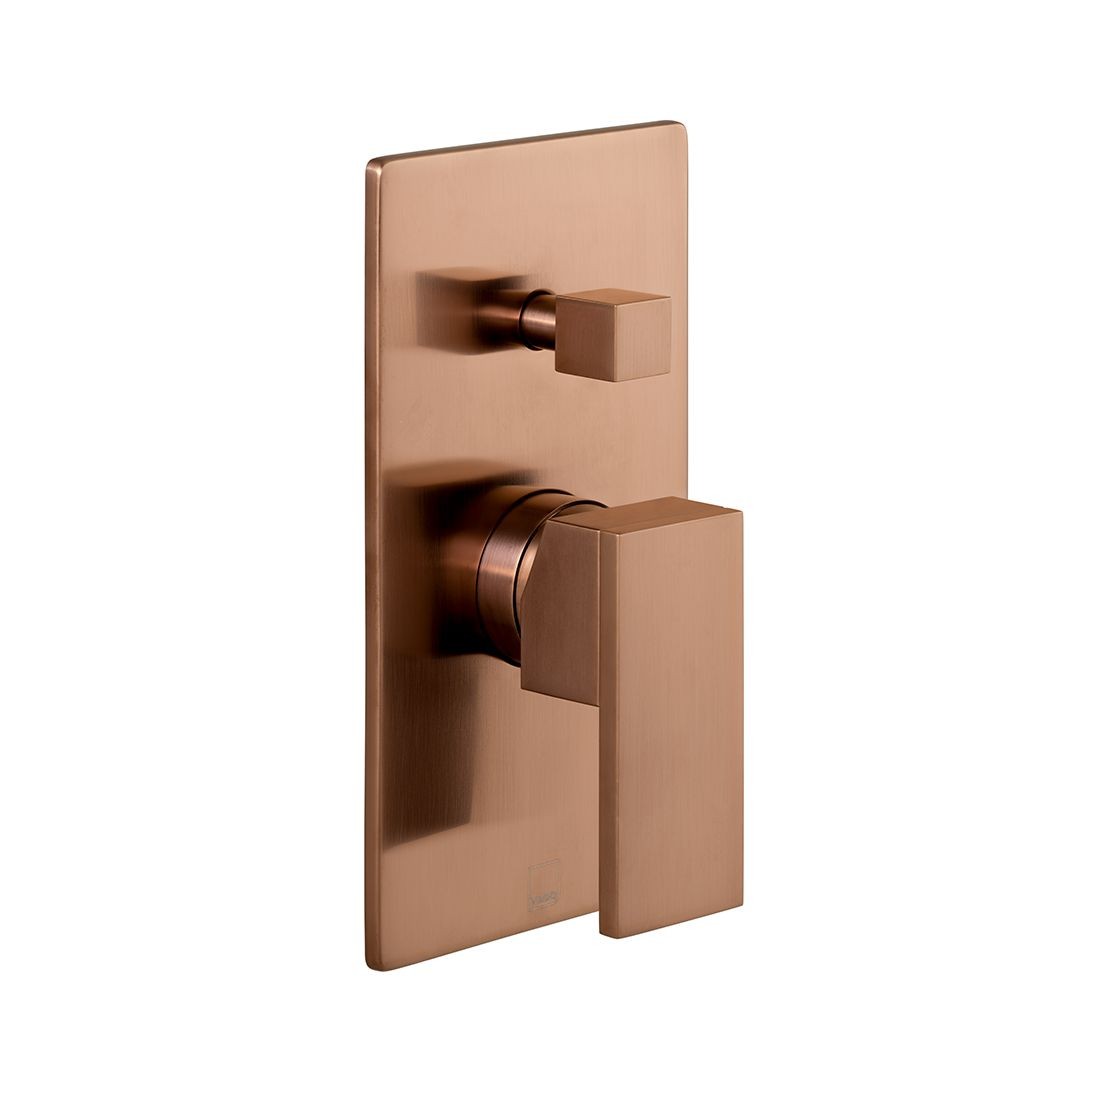 Individual by Vado Notion Manual Shower Valve with Diverter 2 Outlets Brushed Bronze [IND-NOT147A-BRZ]